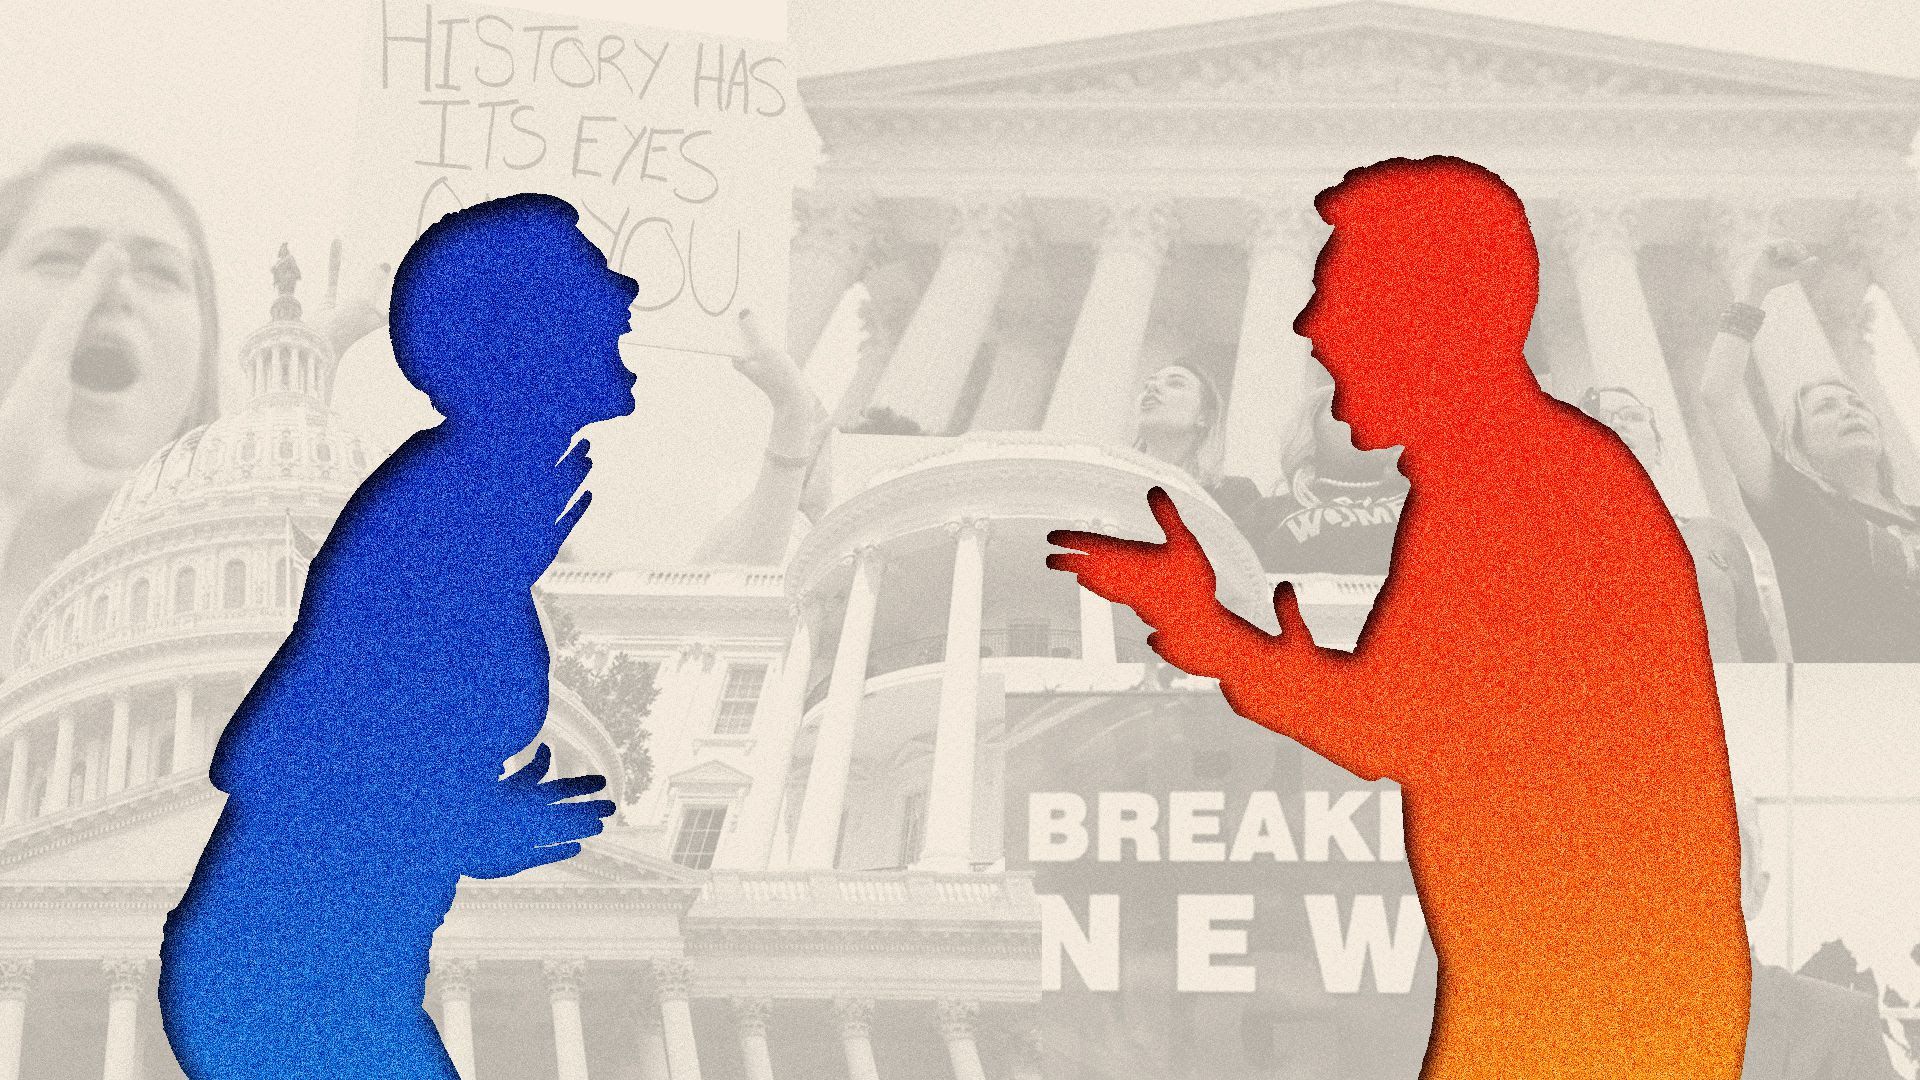 An illustrations of a blue person and a red person screaming at one another set against a partisan backdrop in Washington